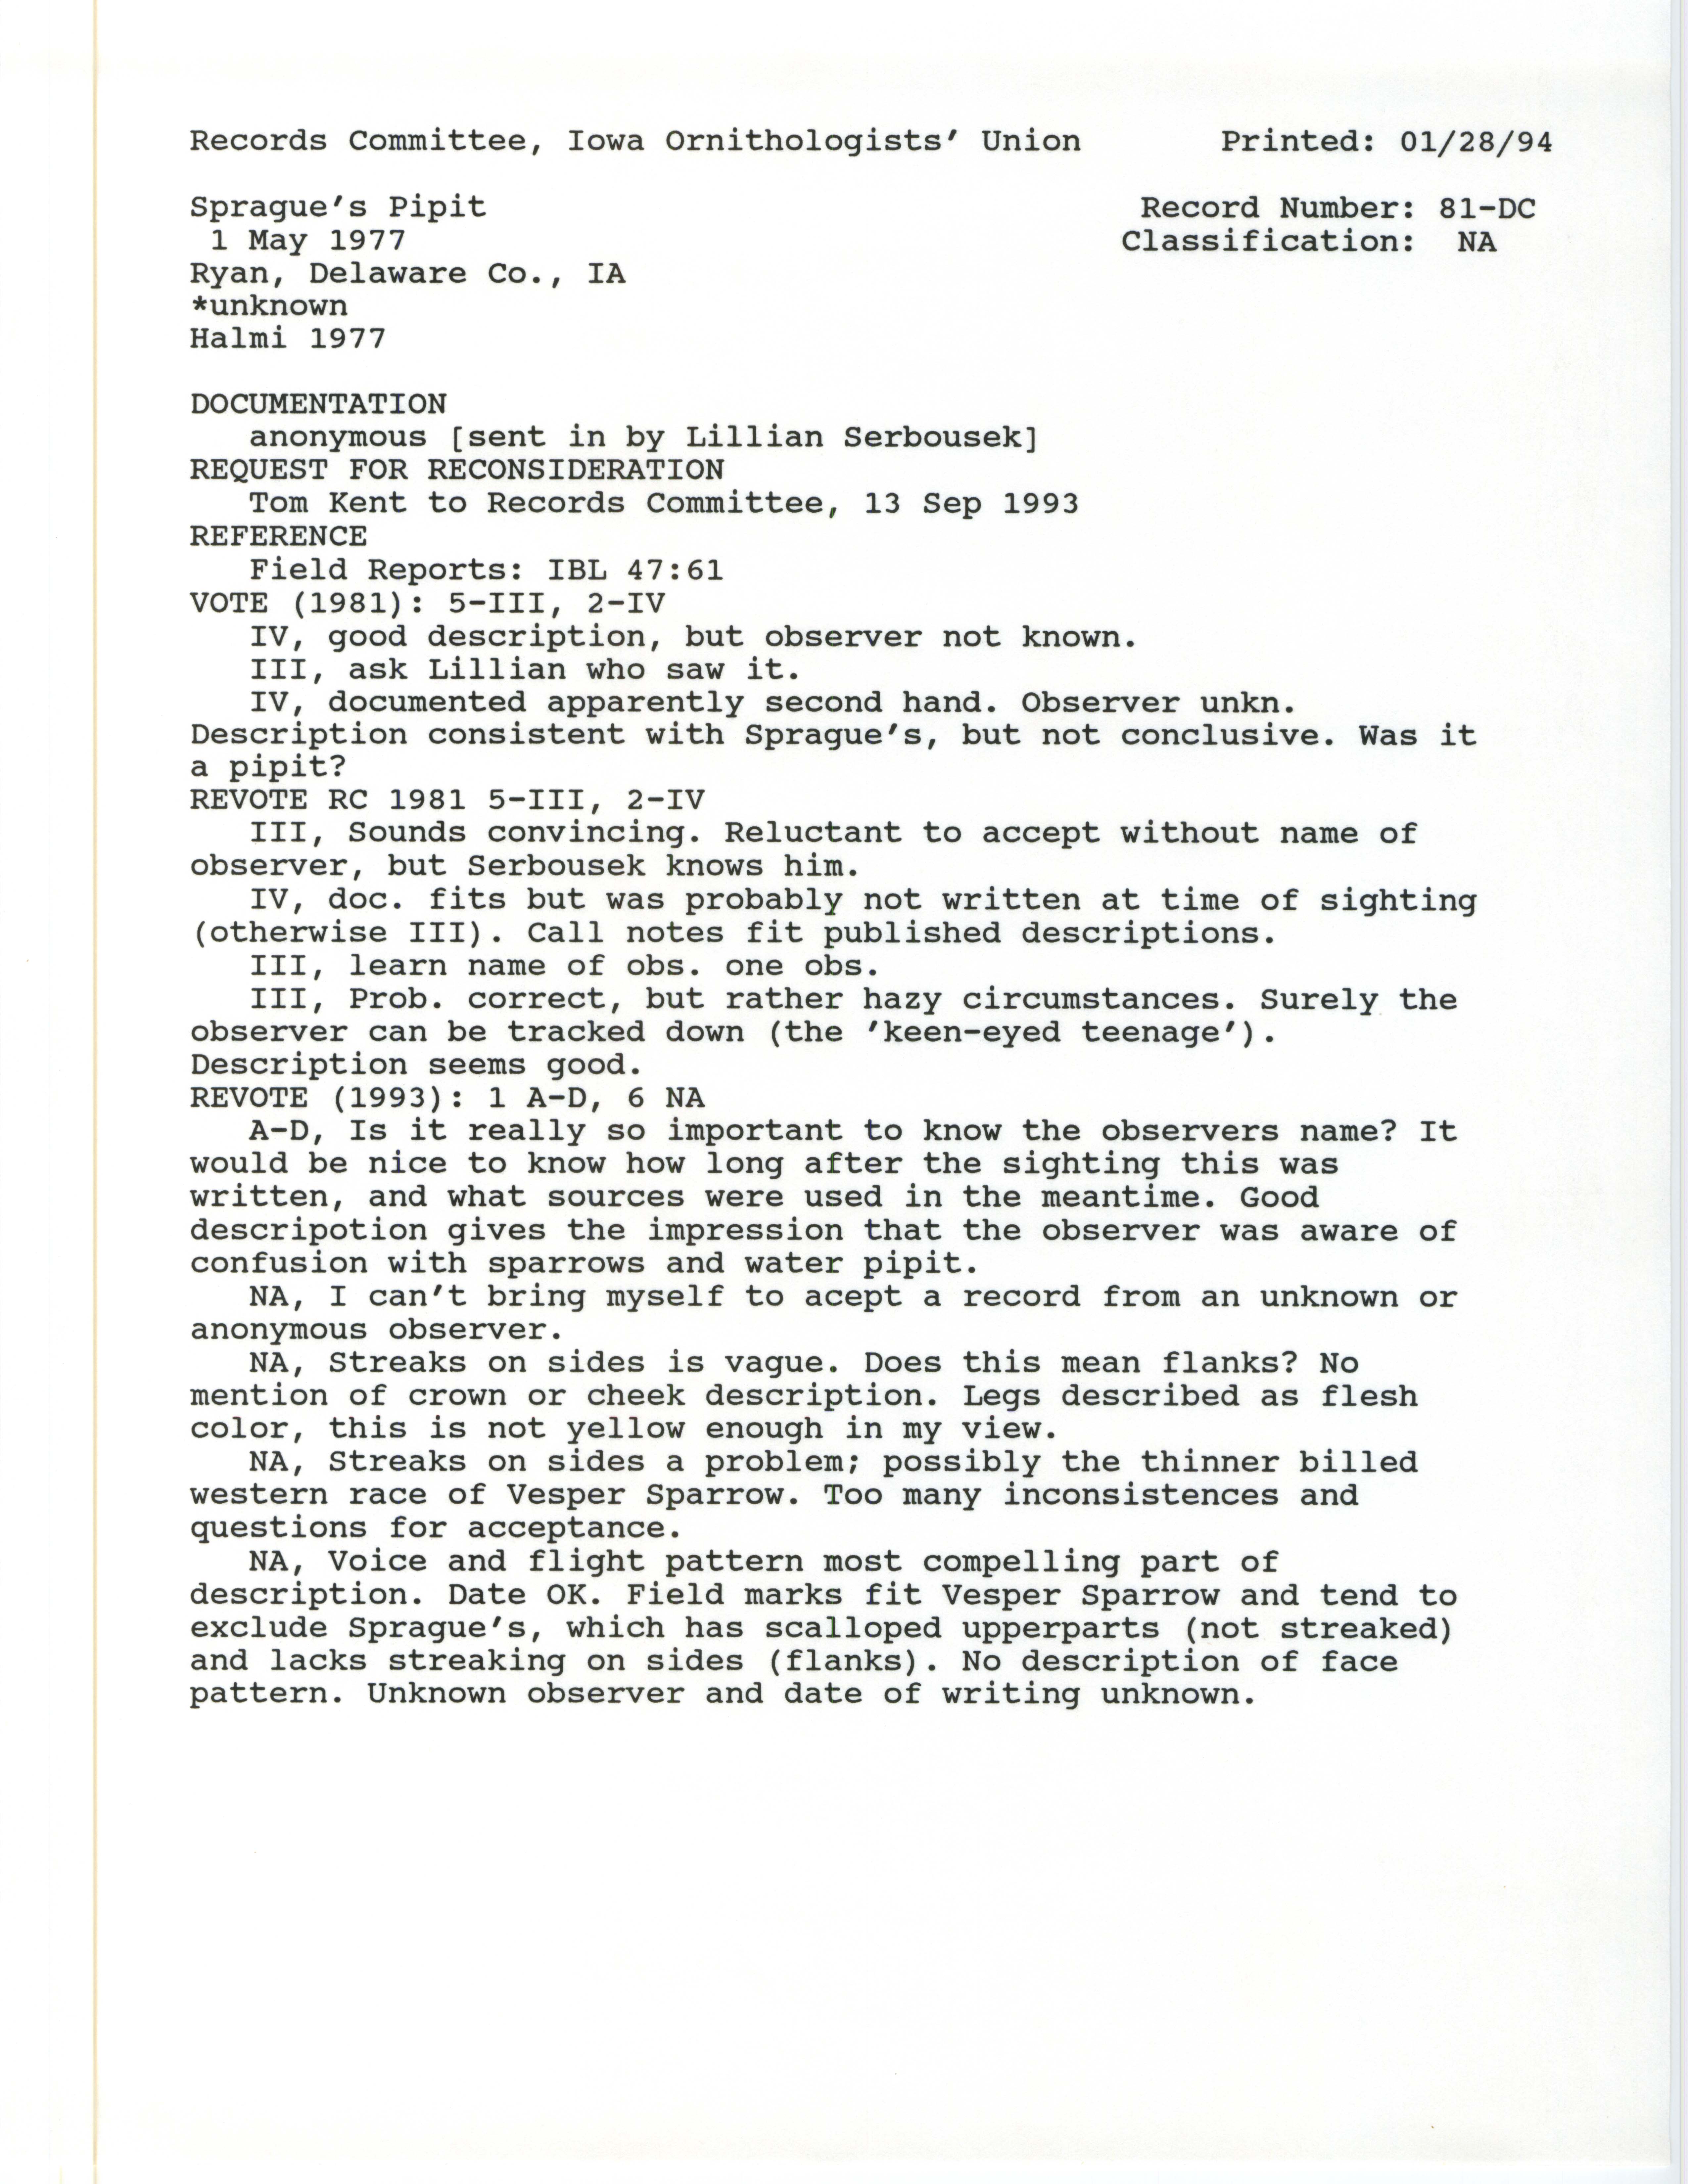 Records Committee review for rare bird sighting for Sprague's Pipit southwest of Delhi, 1977